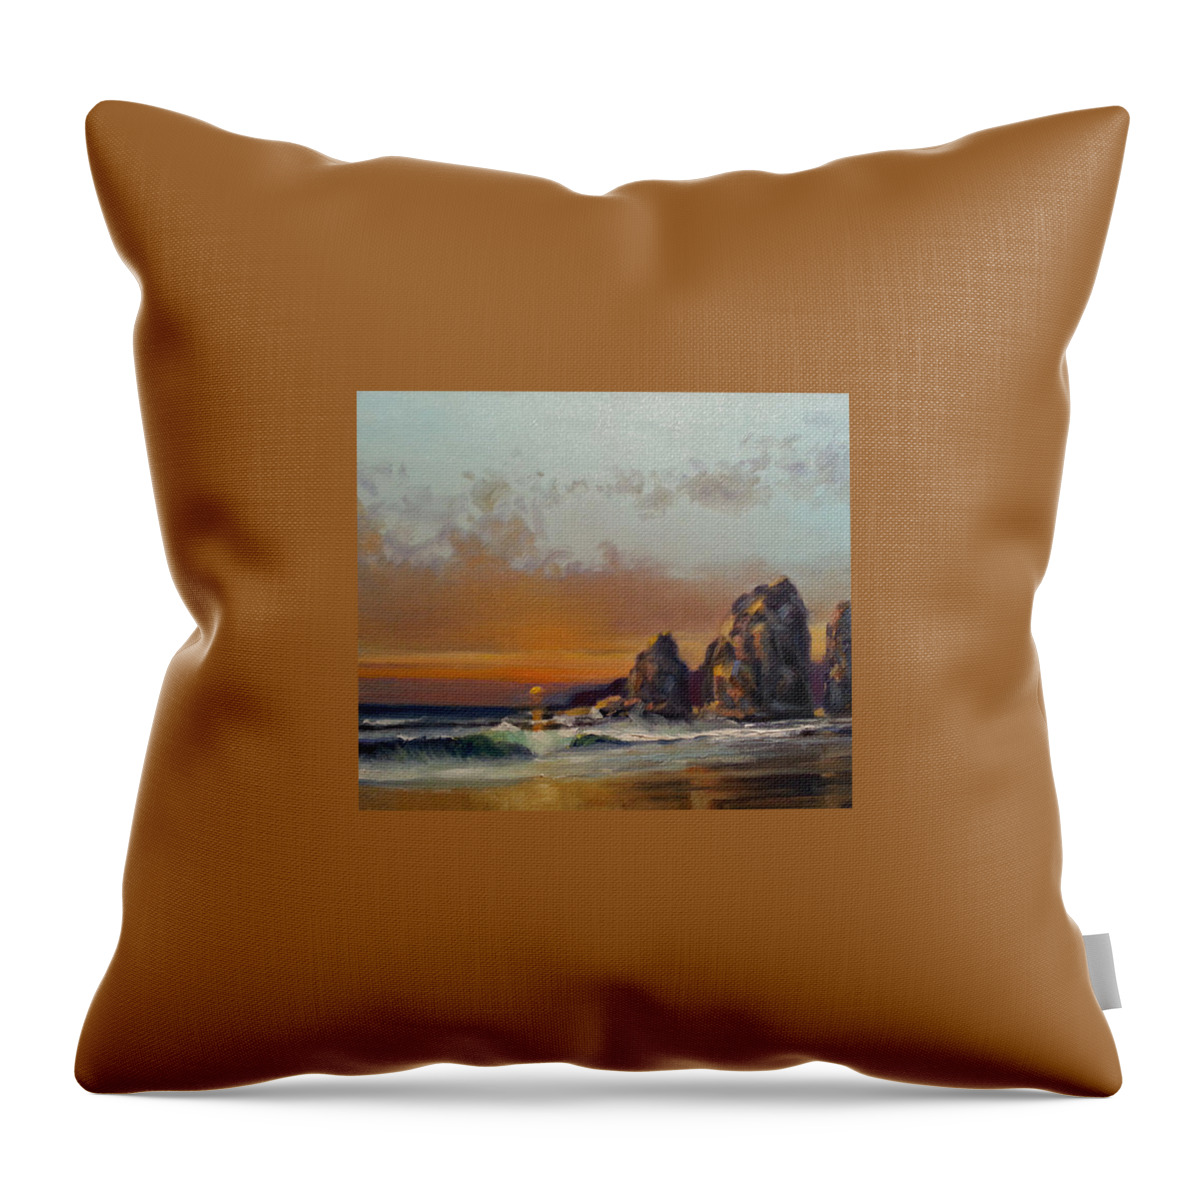  Throw Pillow featuring the painting Mystic Beach by Jessica Anne Thomas